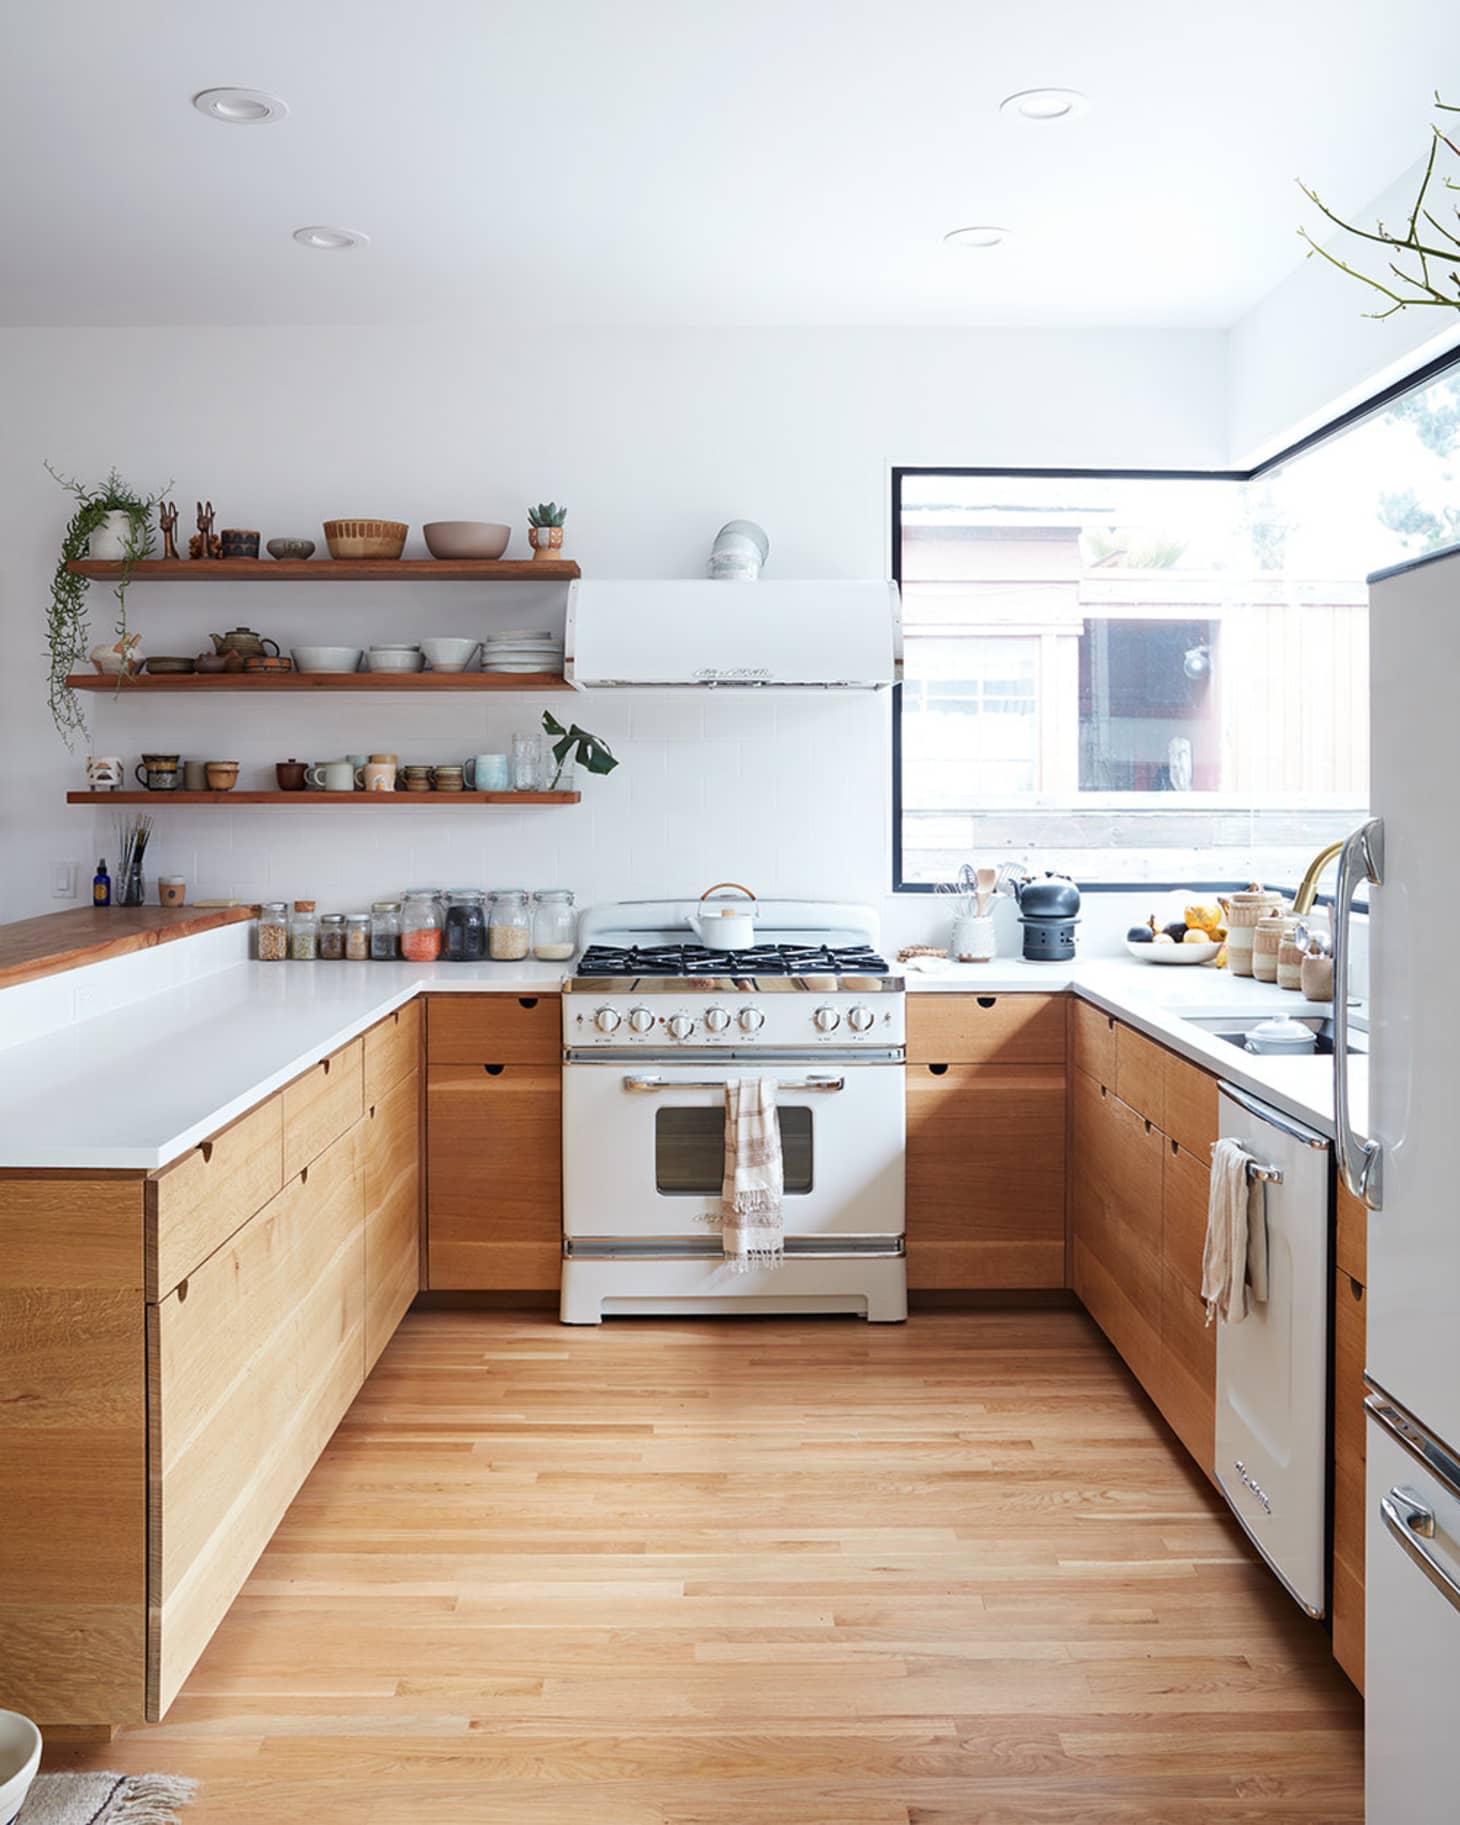 Kitchens Without Upper Cabinets: Should You Go Without? | Apartment Therapy